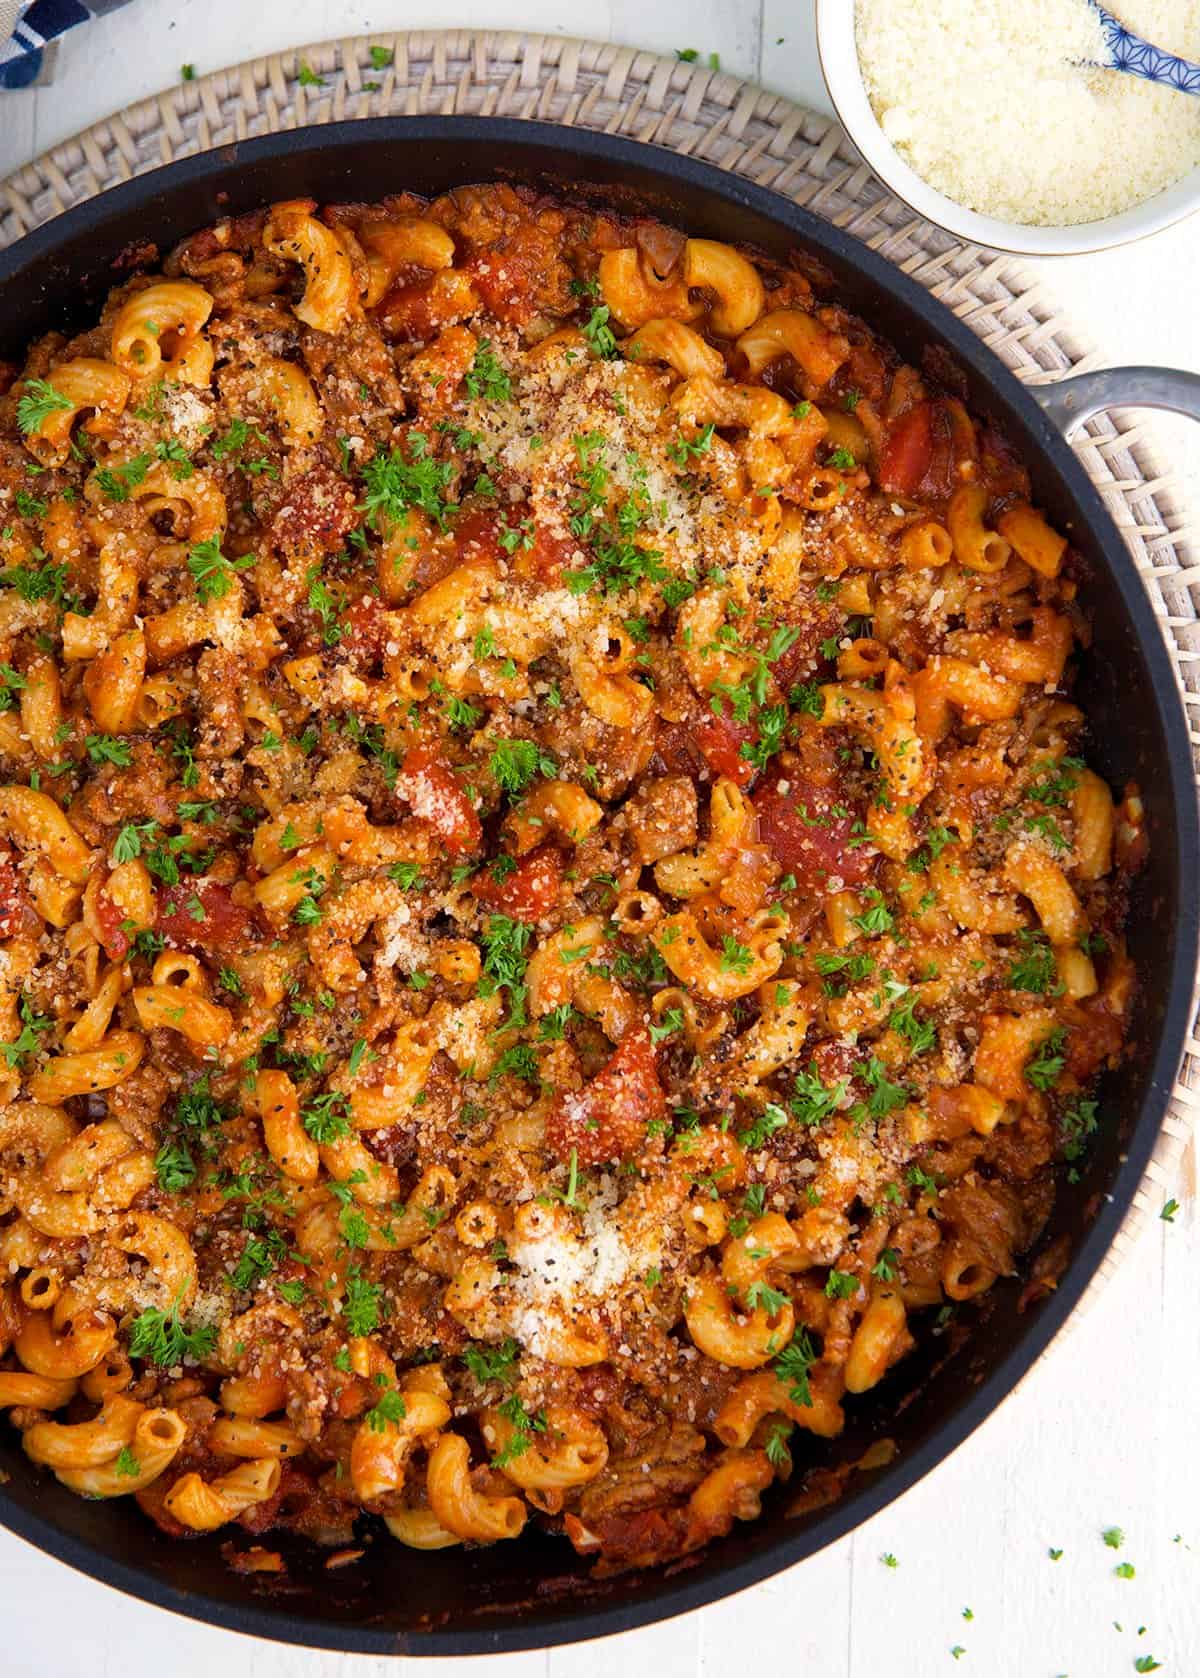 A large black skillet is filled with cooked beefaroni.